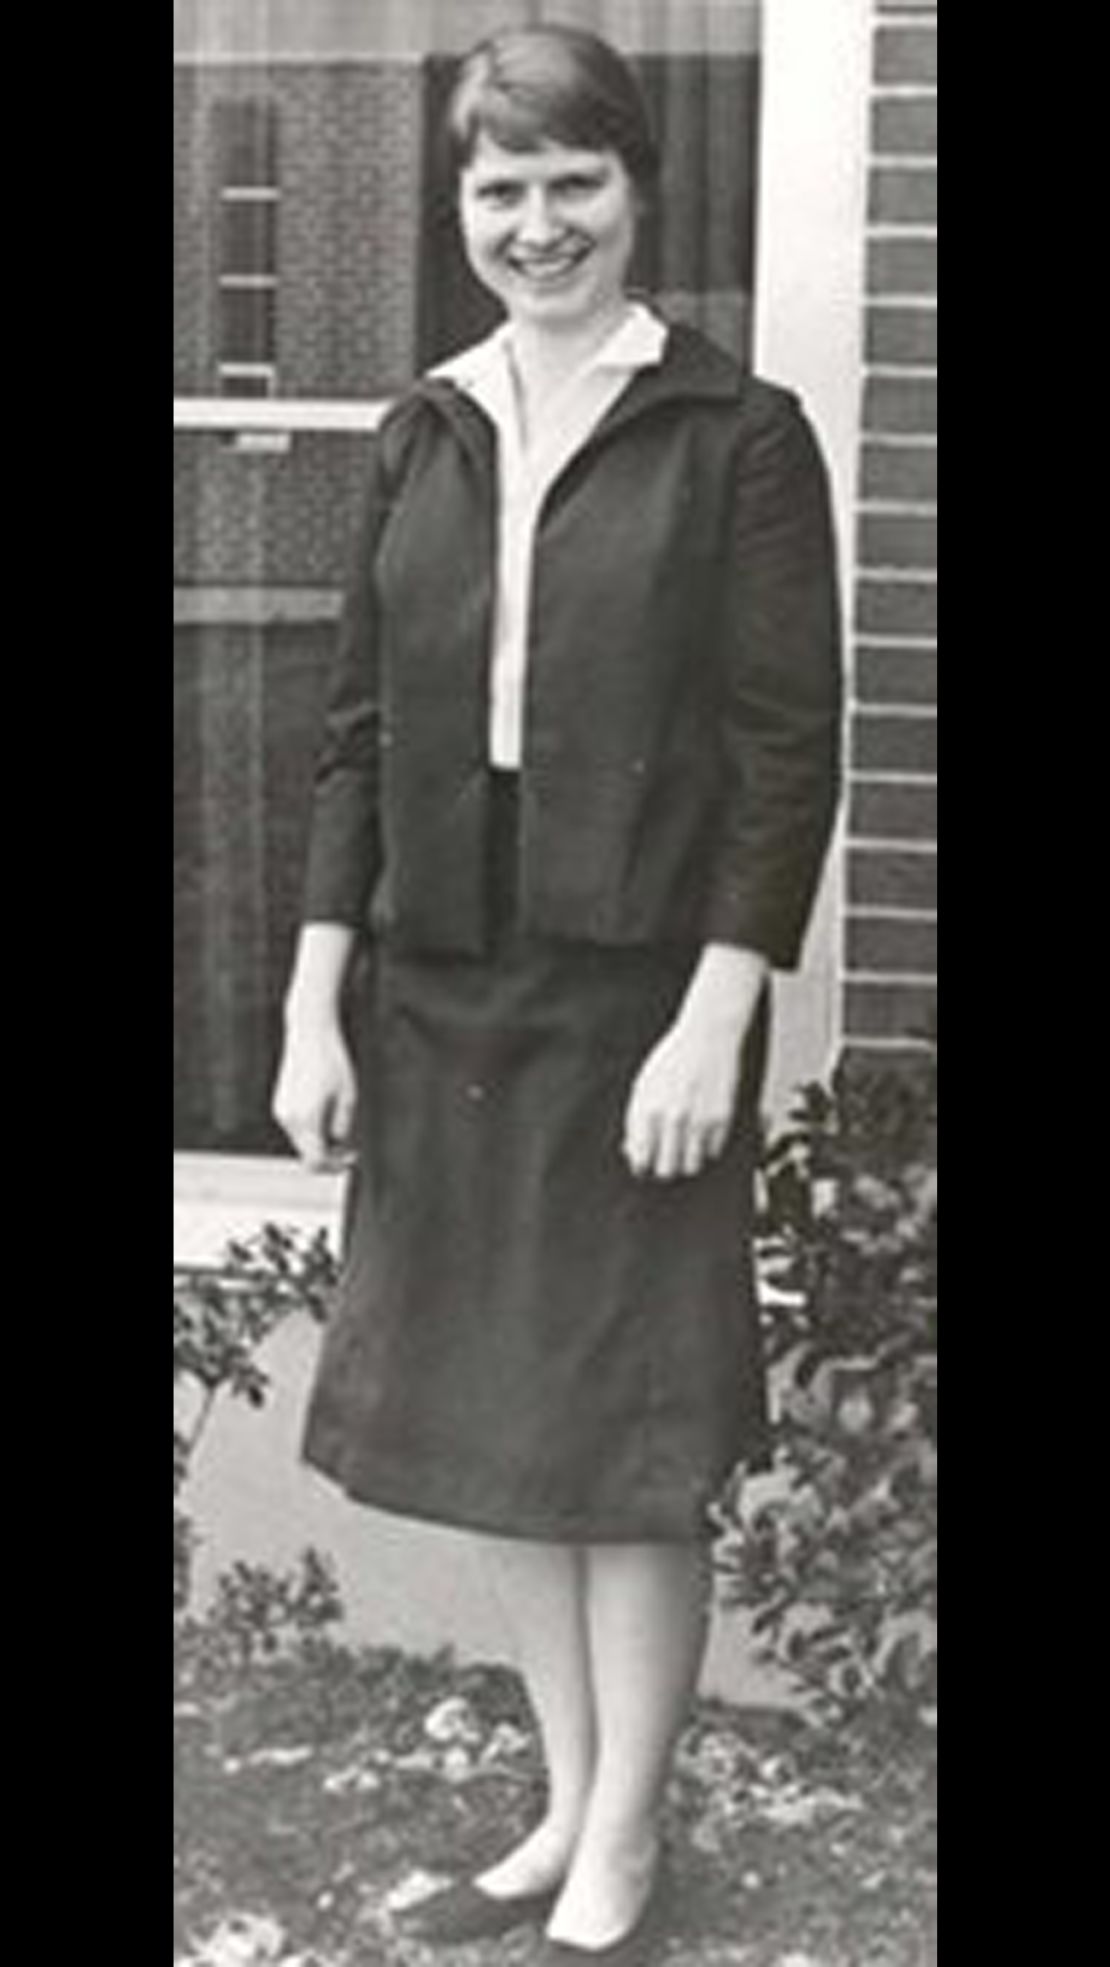 Sister Catherine Ann Cesnik was last seen alive on November 7, 1969. Her body was found January 3, 1970. The case remains open and unsolved.